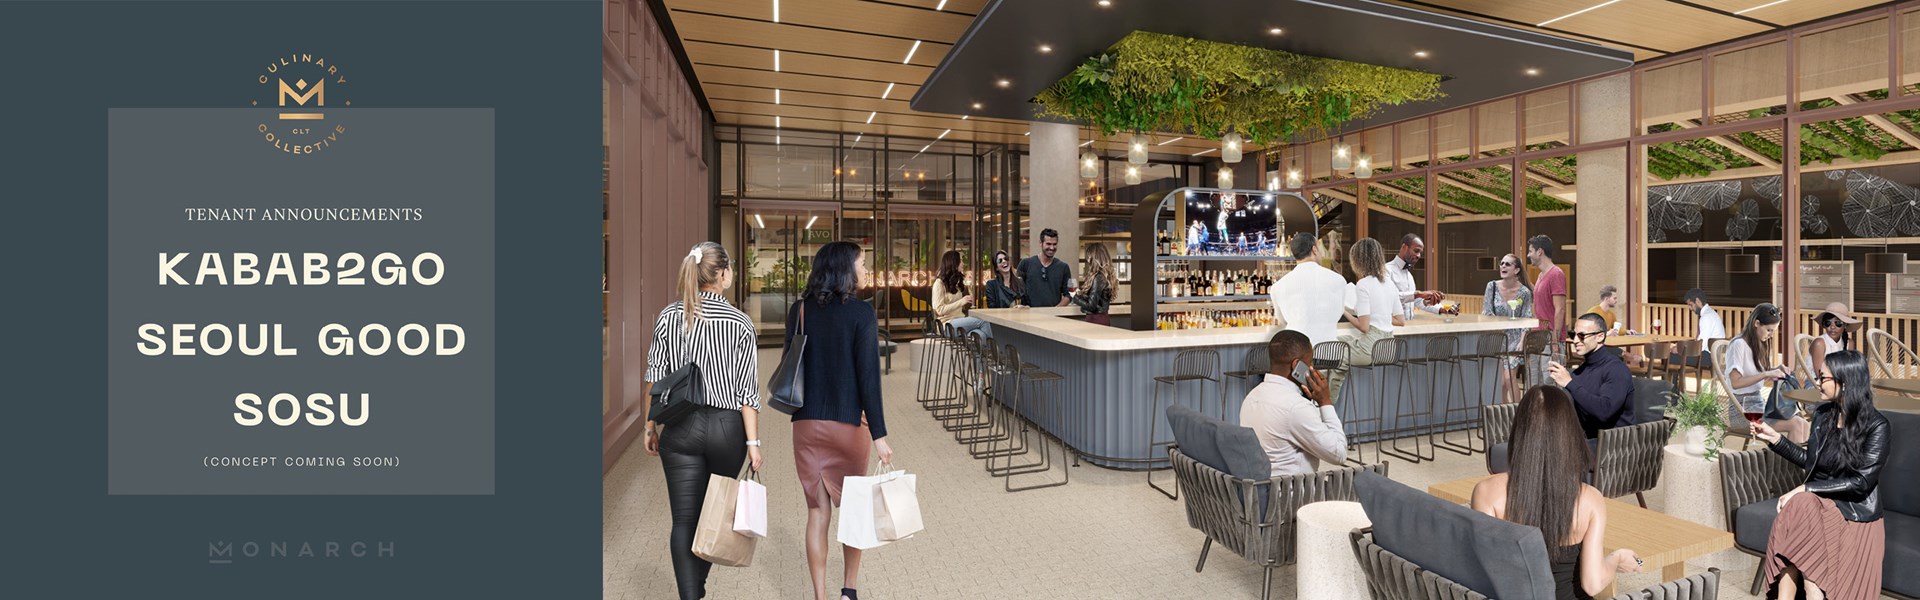 Monarch Market Announces Cocktail Bars and Additional Food Stall Vendors